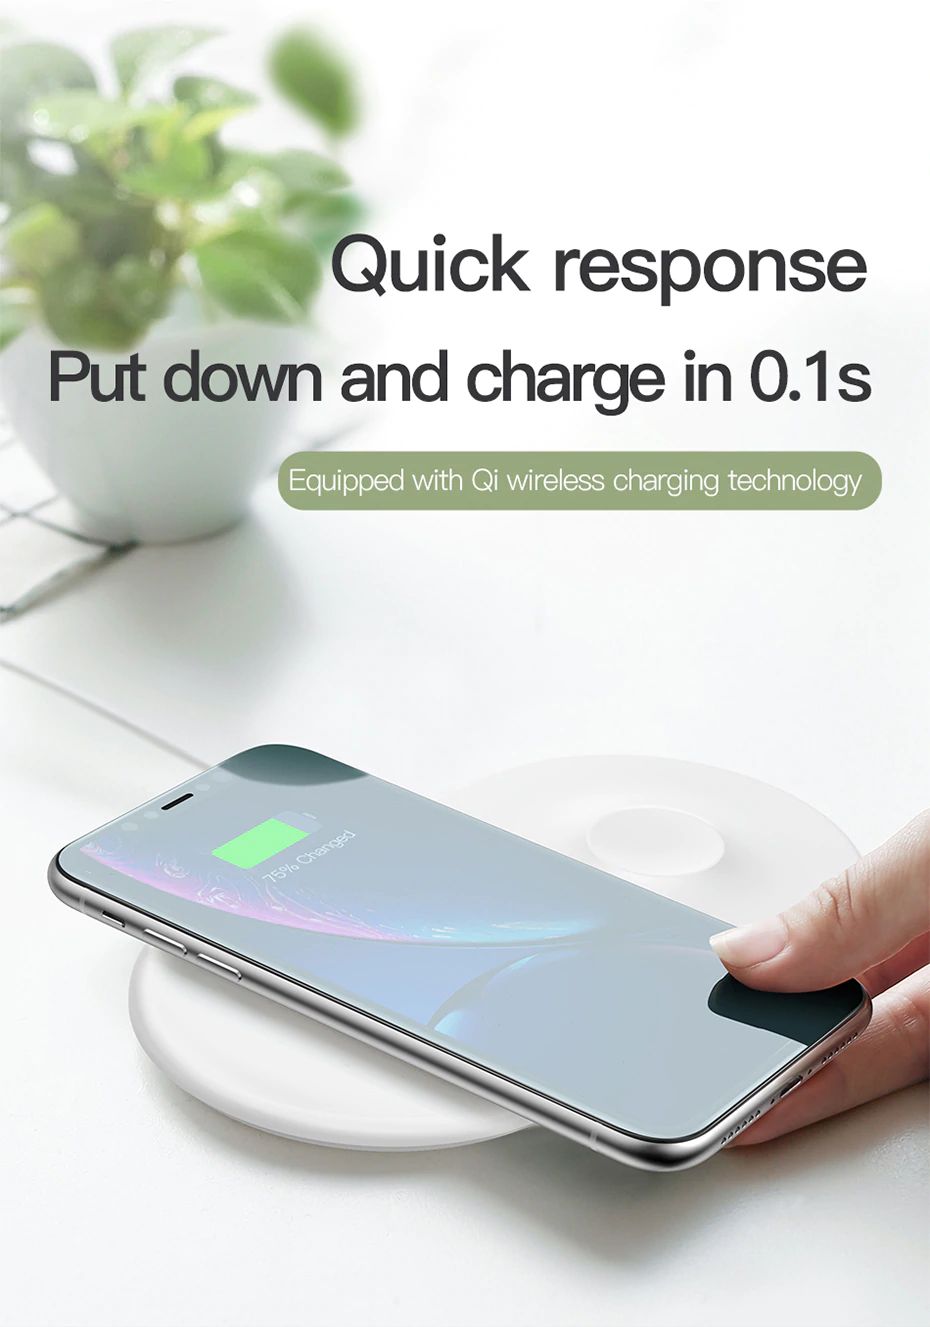 Baseus Smart 2 In 1 Wireless Qi Charger For Iphone Apple Watch (4)